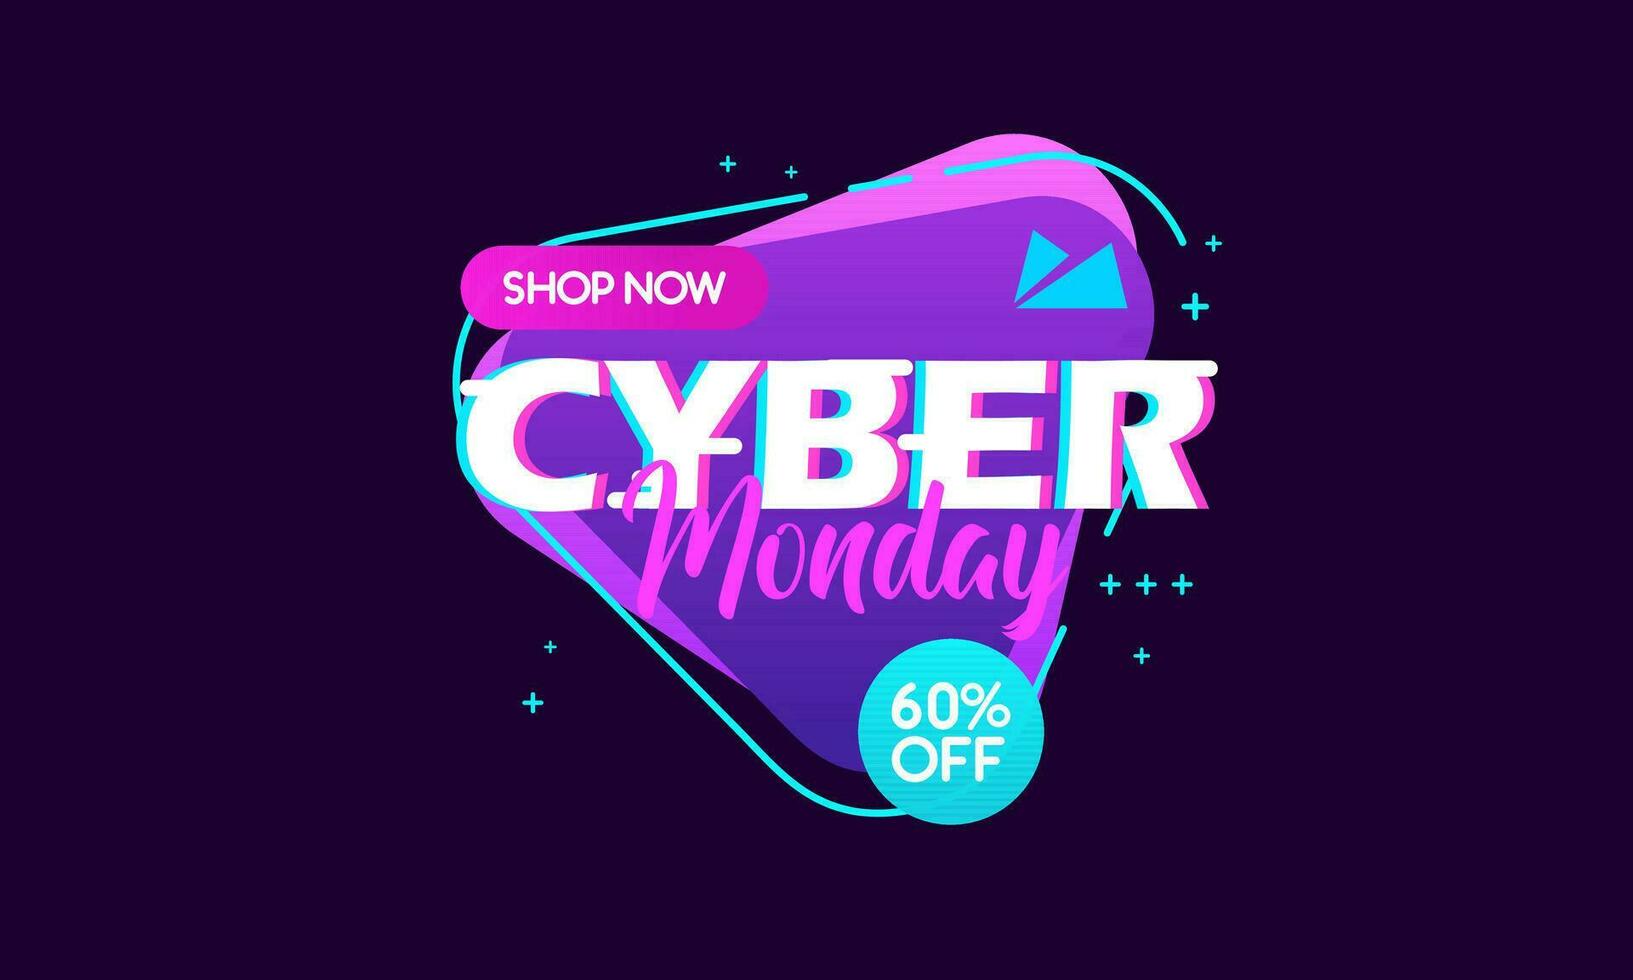 Gradient Cyber Monday Sale Banner Isolated on Dark Background vector